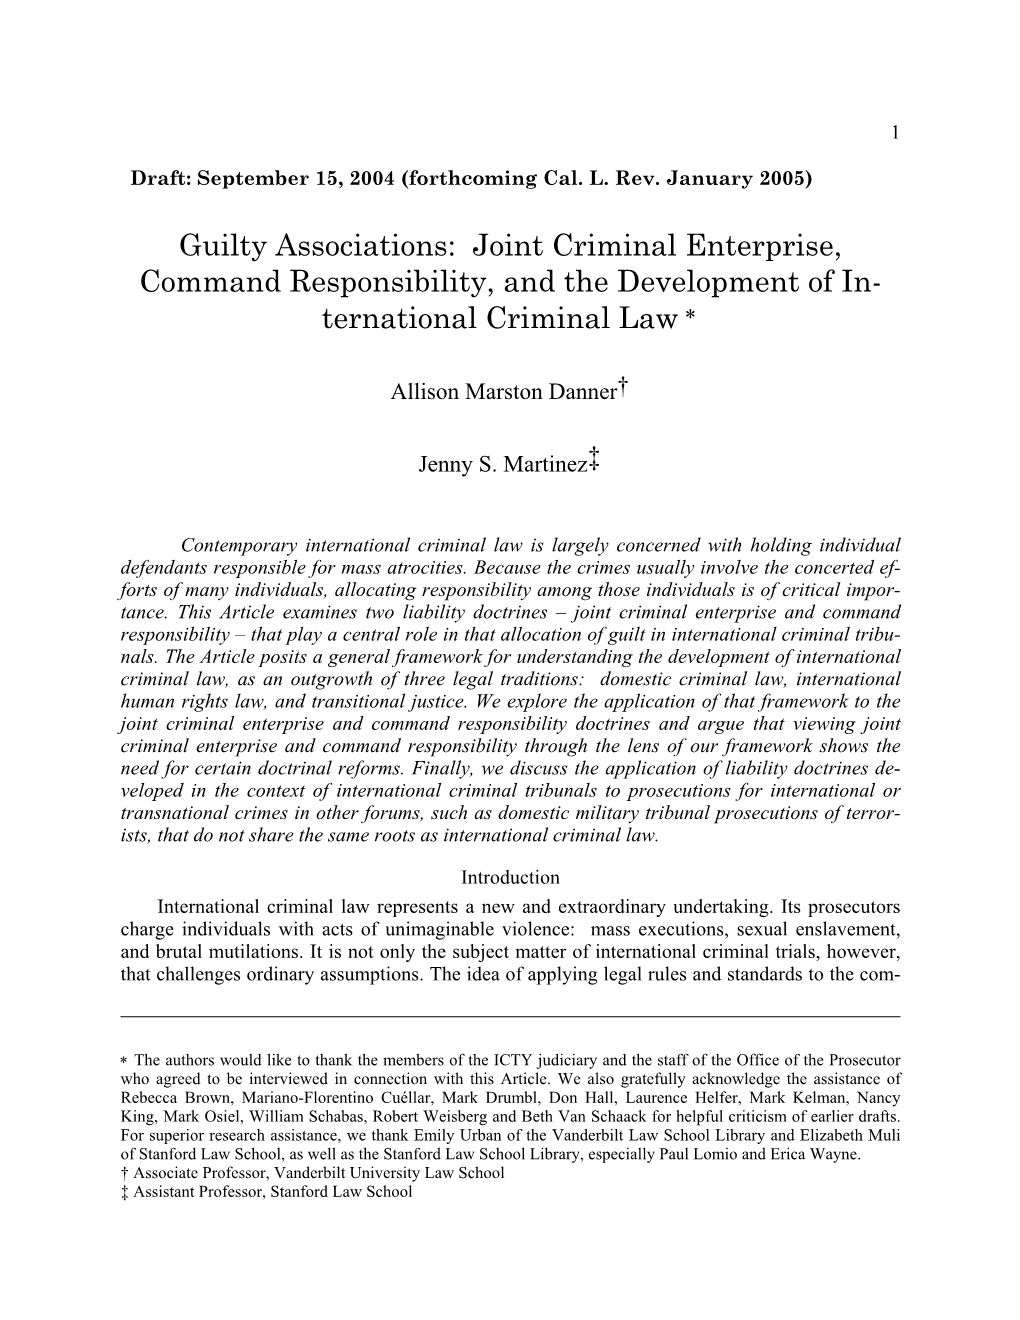 Joint Criminal Enterprise, Command Responsibility, and the Development of In- Ternational Criminal Law ∗